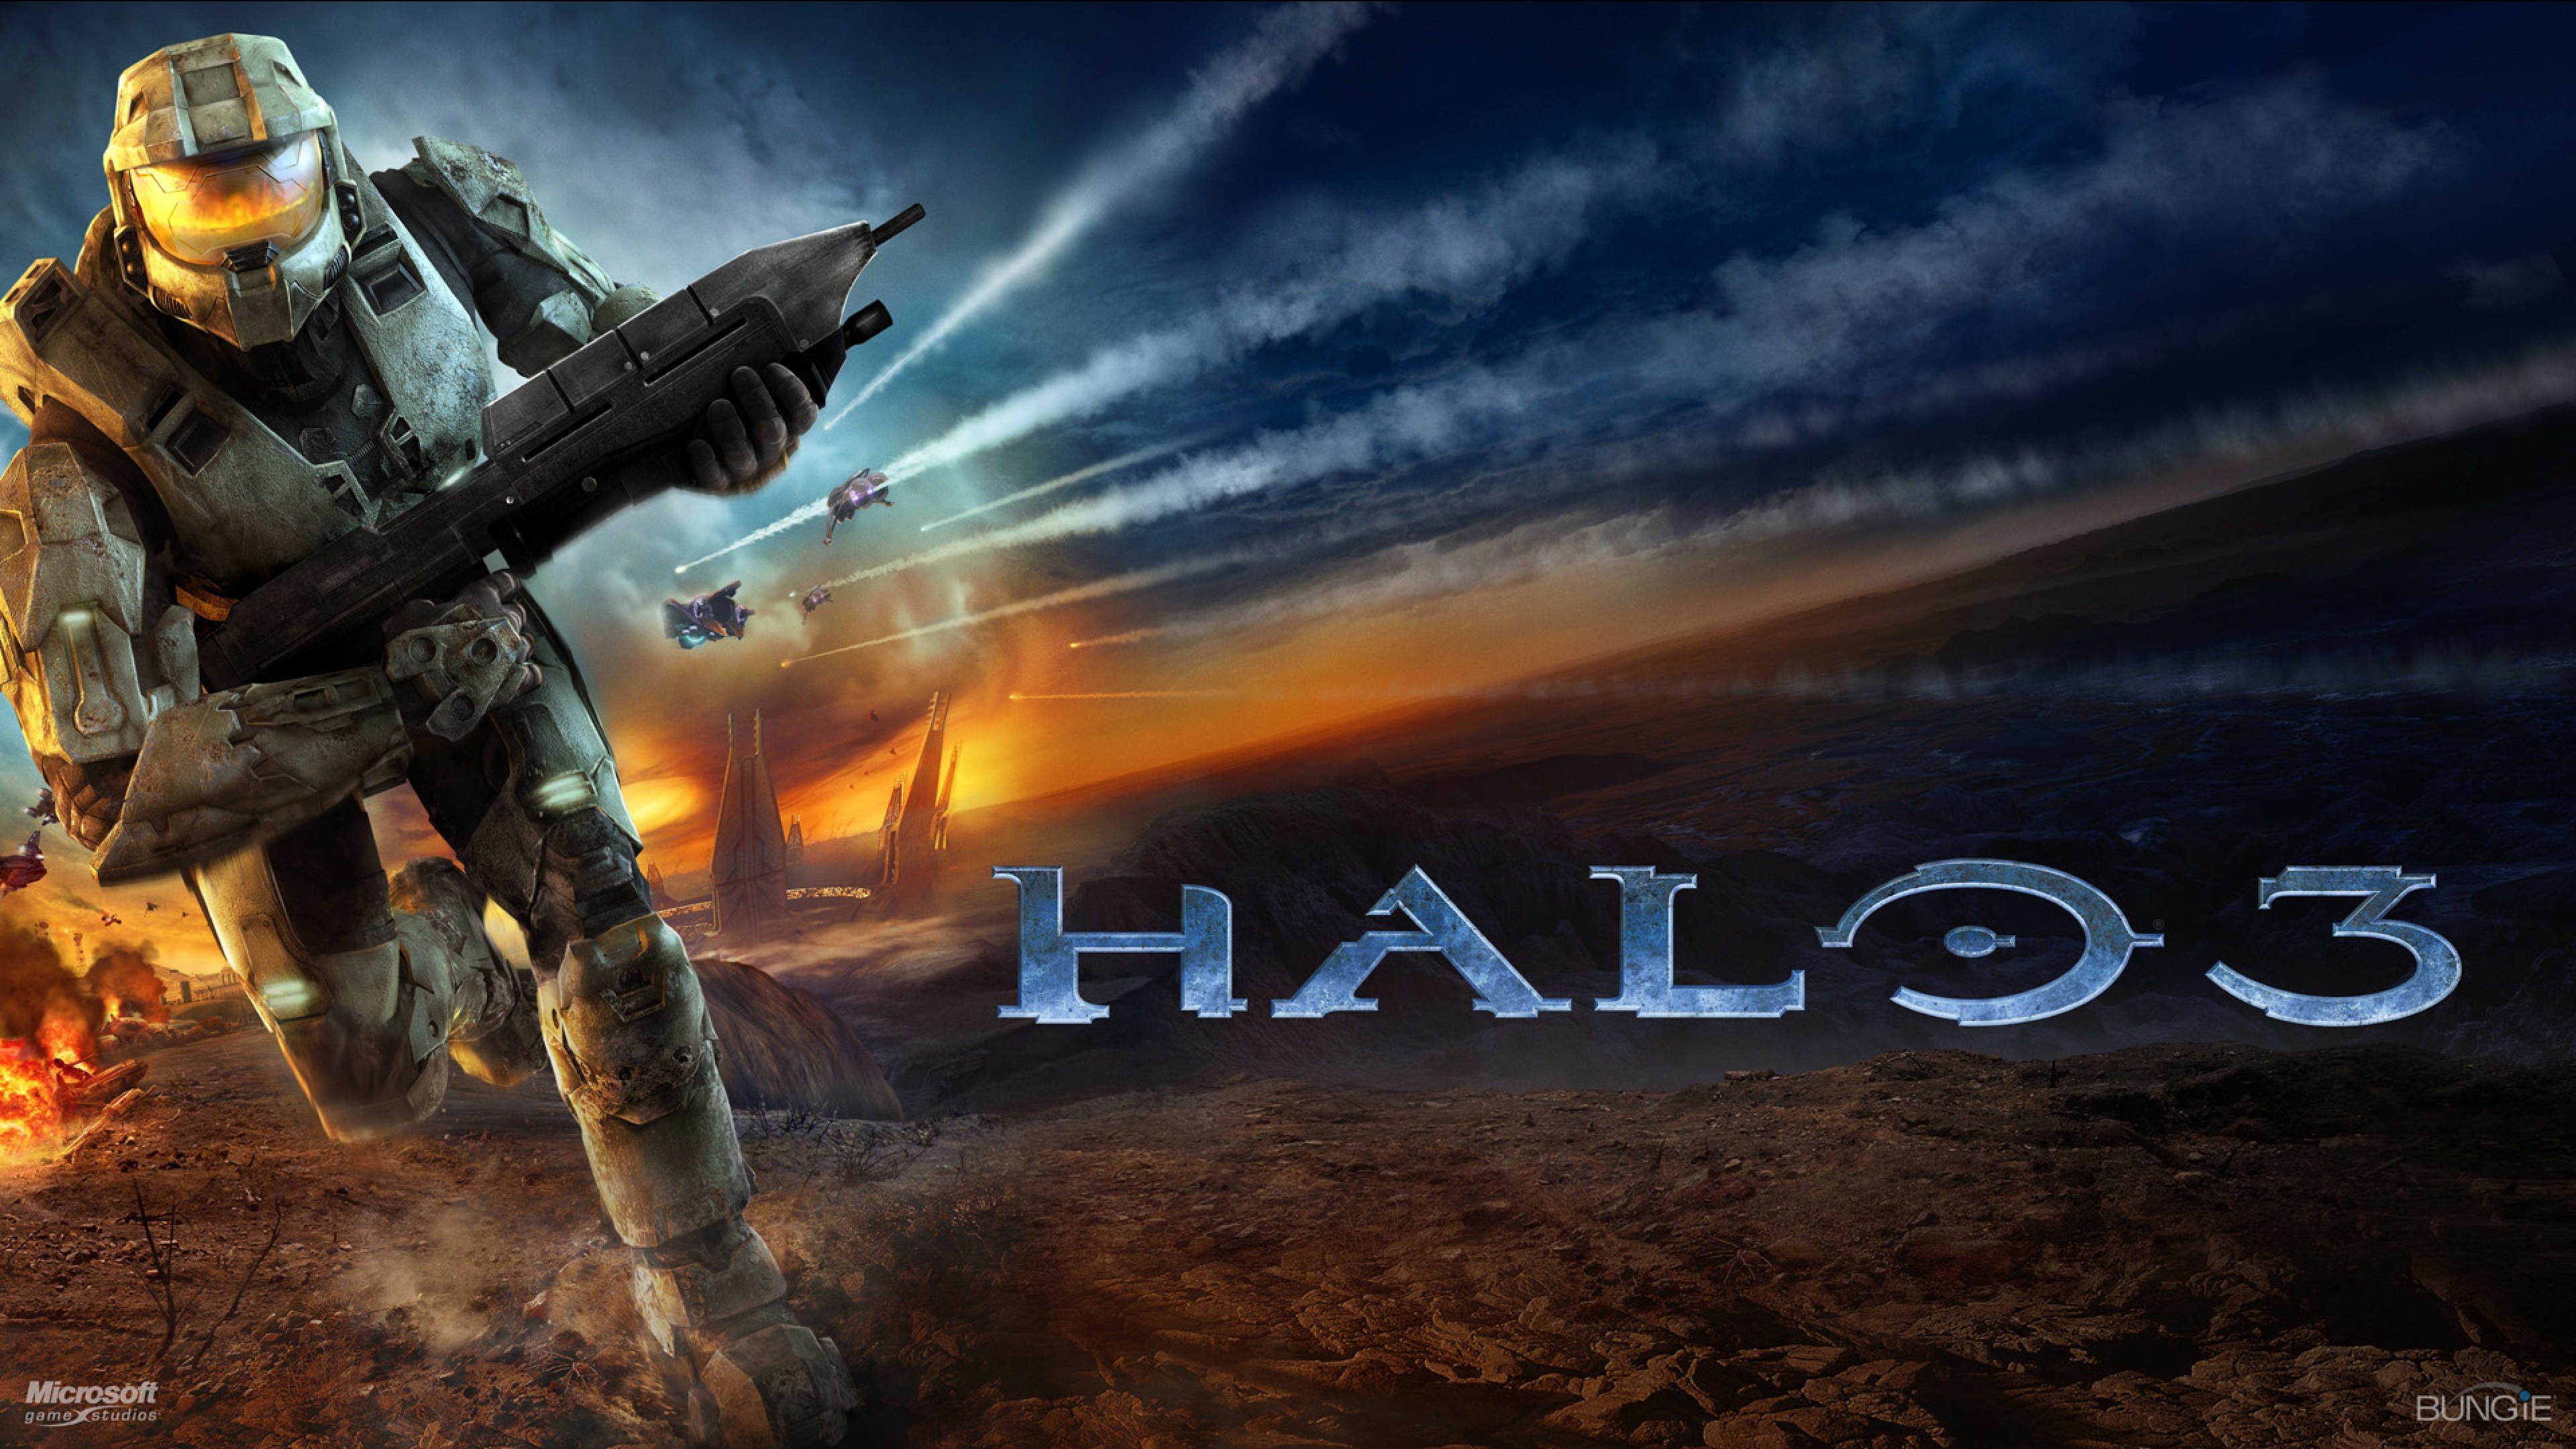 Free download Halo 3 Soldier Run Sky Explosion Wallpaper ...